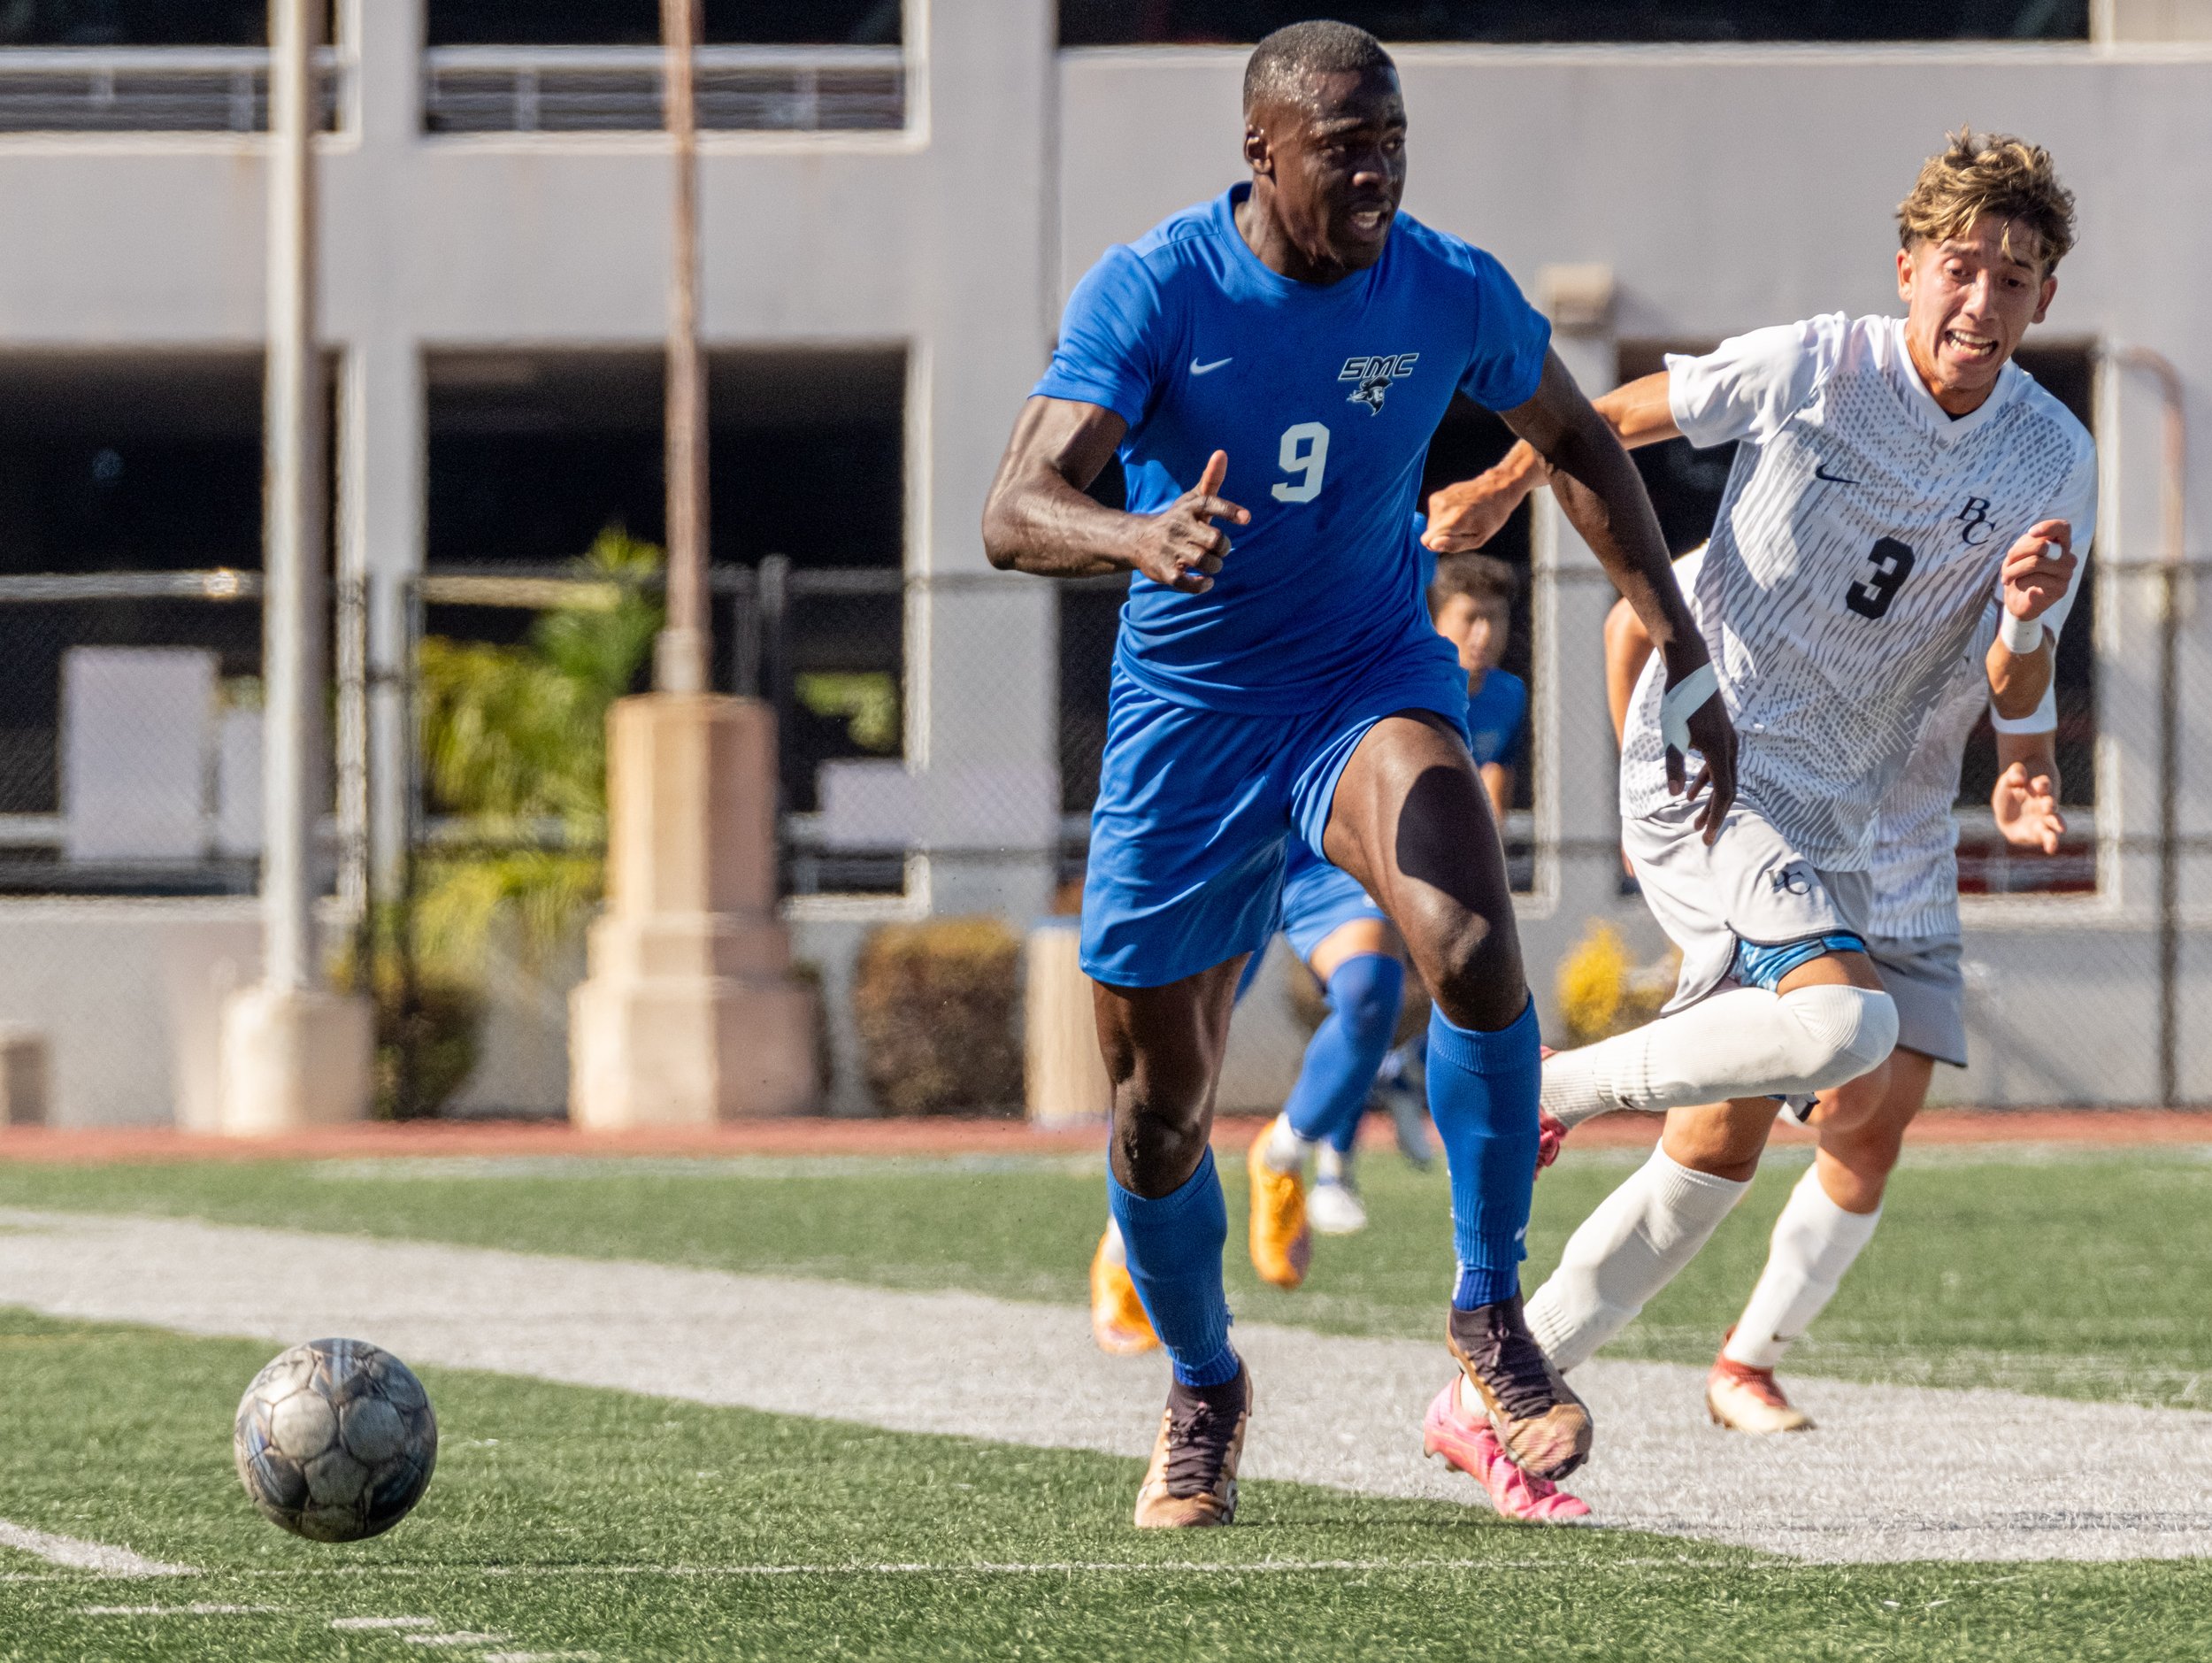  Santa Monica College(SMC) men's soccer forward Philip Hephzibah(3) running towards the ball while his jersey is being pulled by Bakersfield Renegade defender Elijah Espinoza(3) on Tues, Oct. 3. SMC would go and shutout the Renegades with a score of 